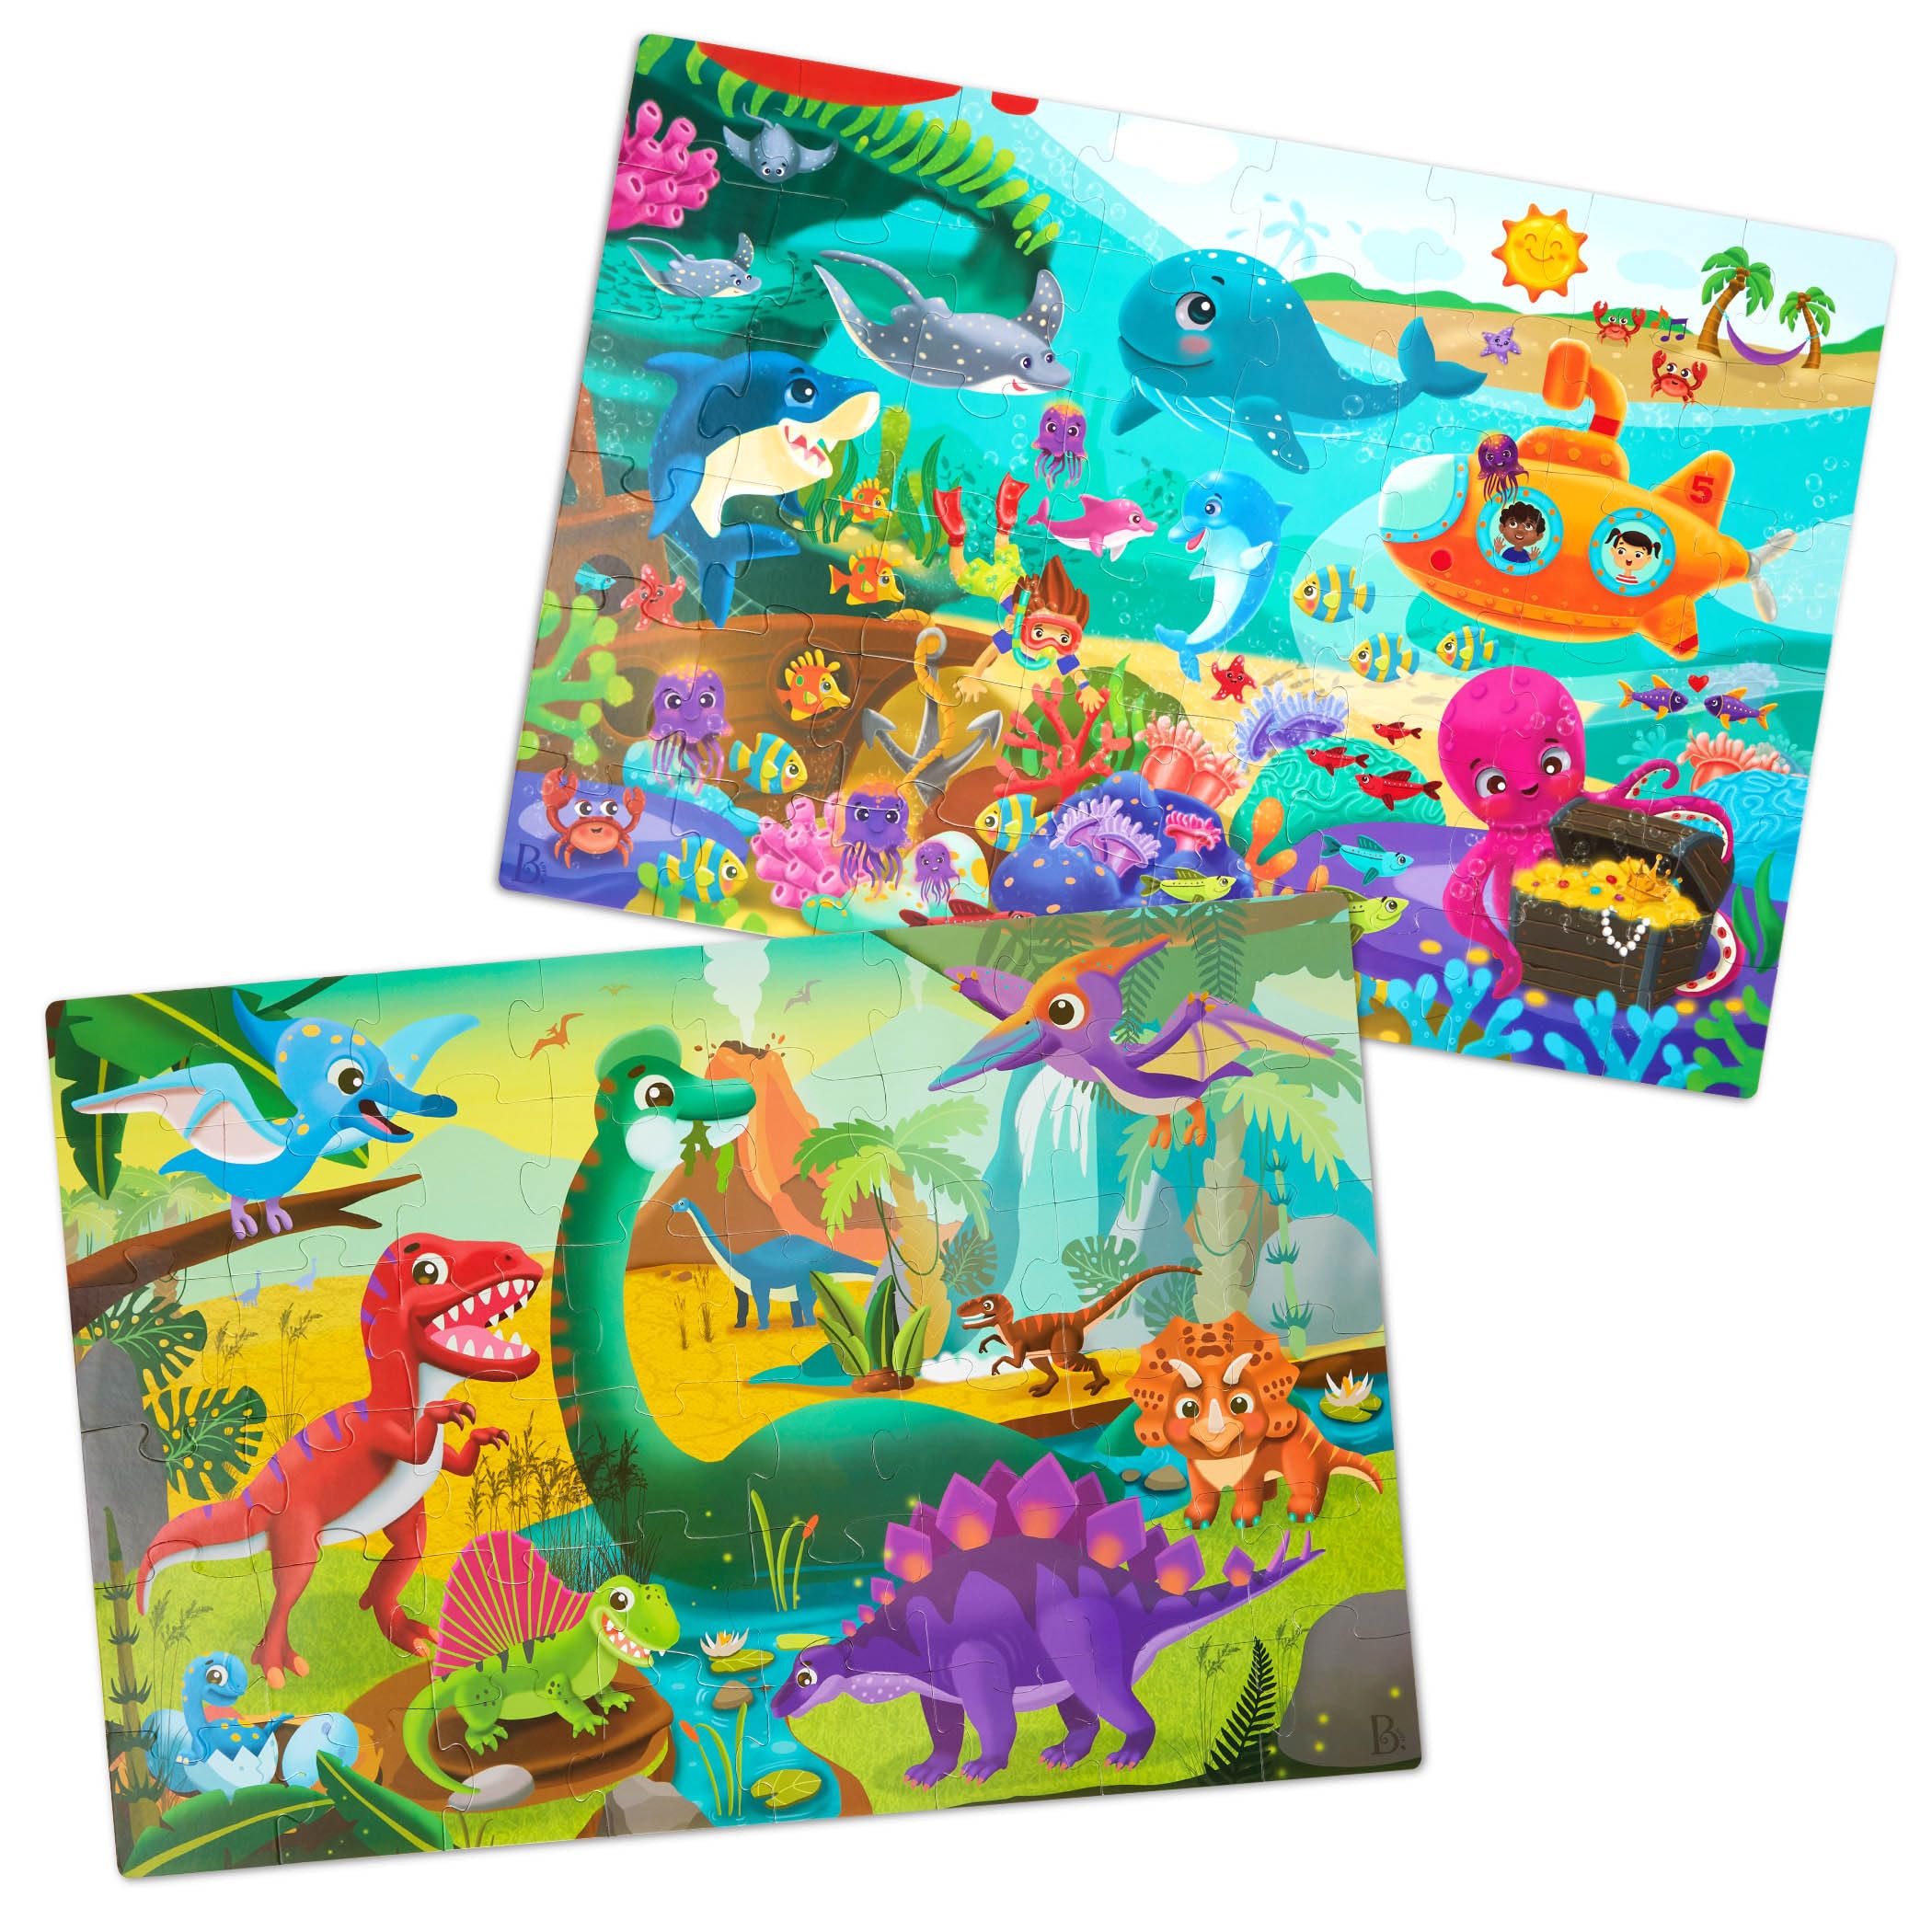 B. toys- Gigantic Jigsaw 2-Pack - Sea & Dinosaurs- 48-Piece Floor Puzzles – 2 Puzzles, Ocean & Dinos – Large 2 x 3 Feet Jigsaw Puzzles for Kids – Educational & Developmental Toys – 3 Years +